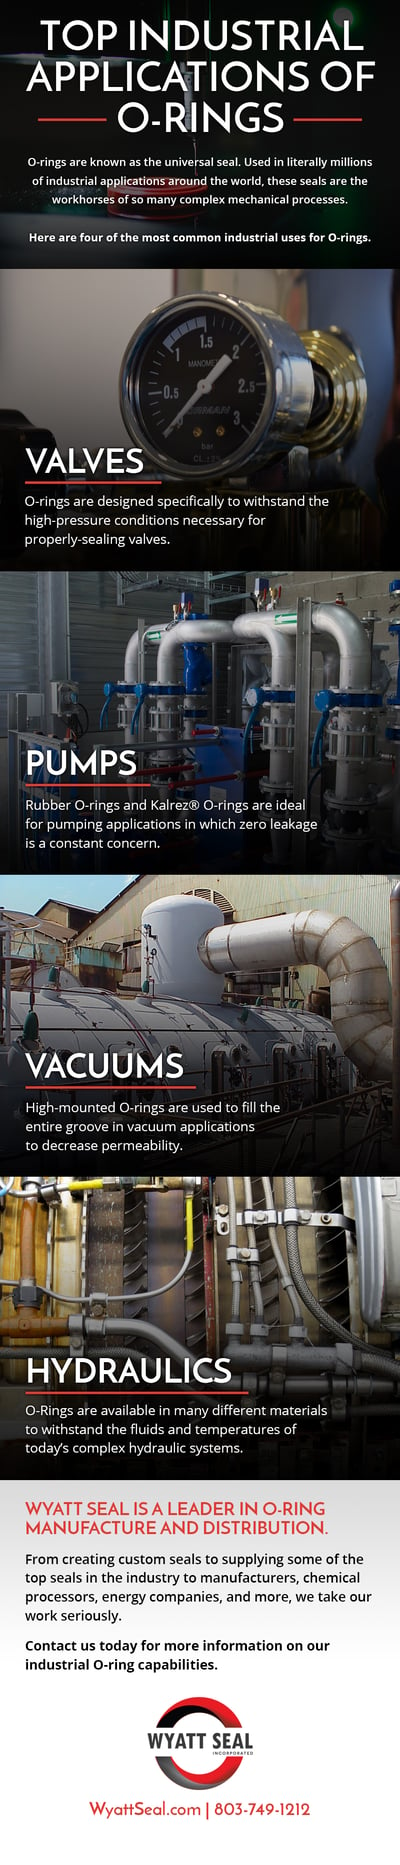 (Wyatt Seal) Top Industrial Applications of O-Rings Q4 2017 Infographic V2 - APPROVED (1).jpg